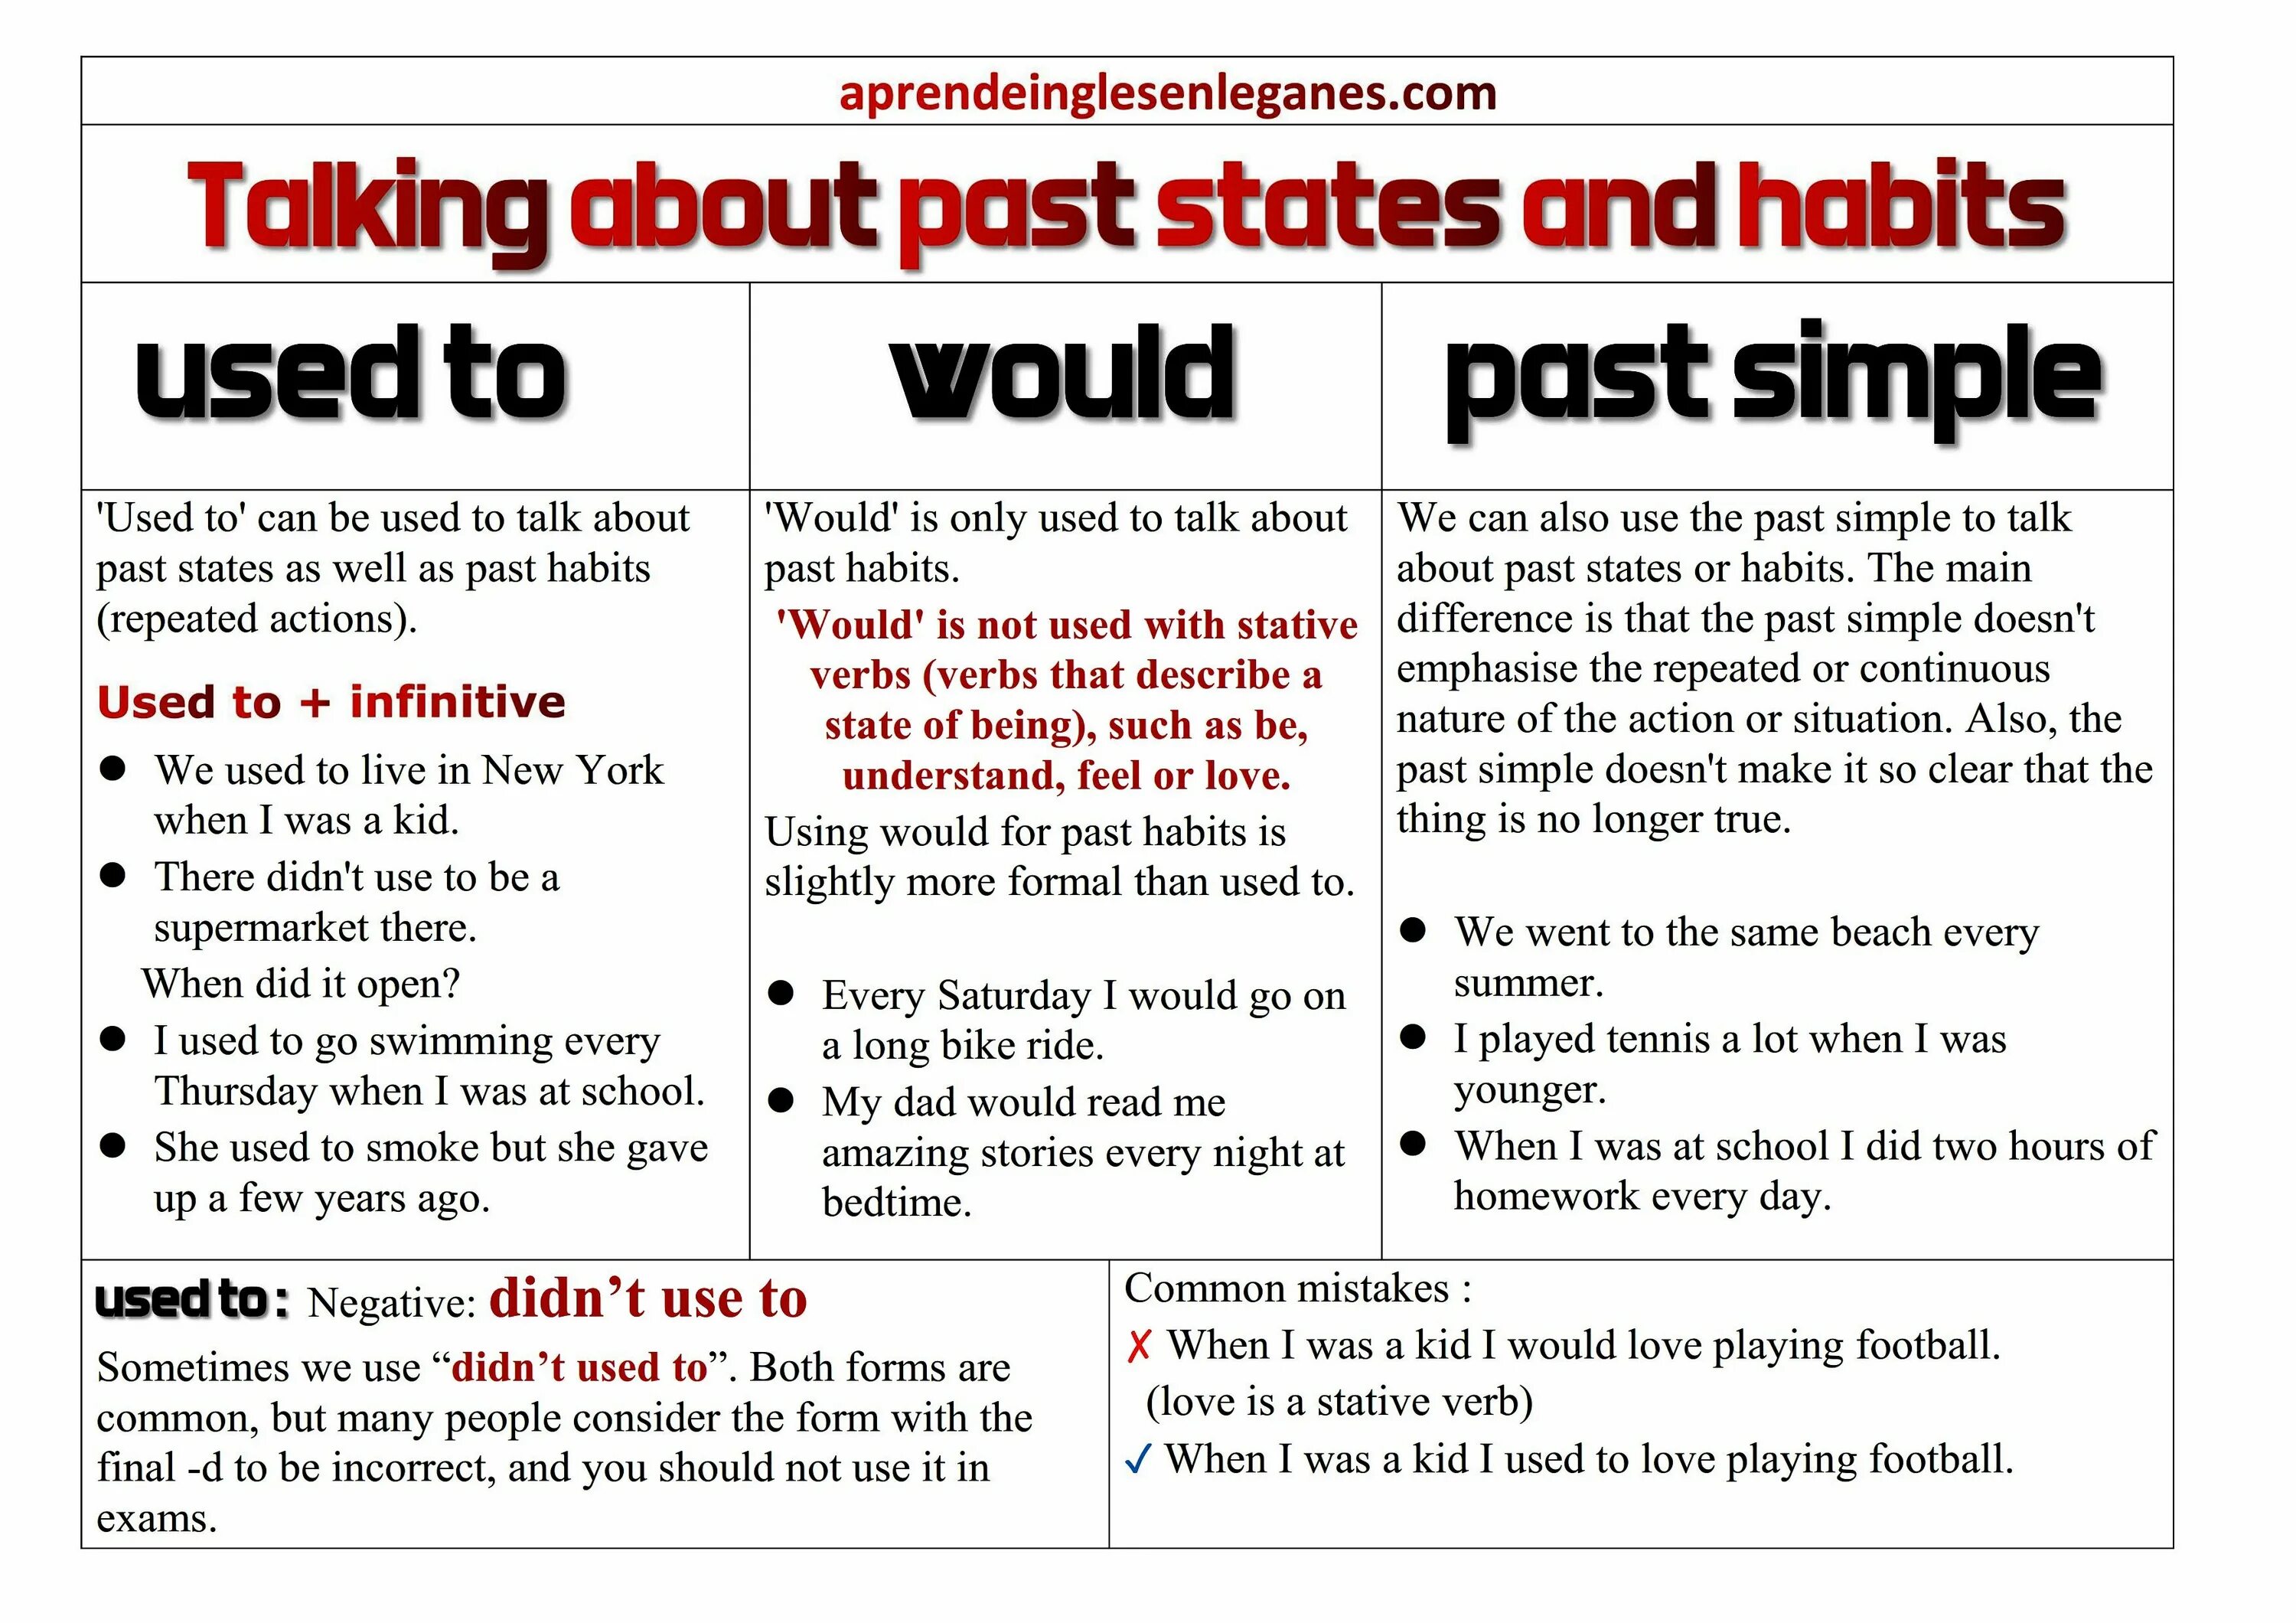 In the past people lived in. Past States. Present and past Habits. Past Habits used to правило. Past Habits.